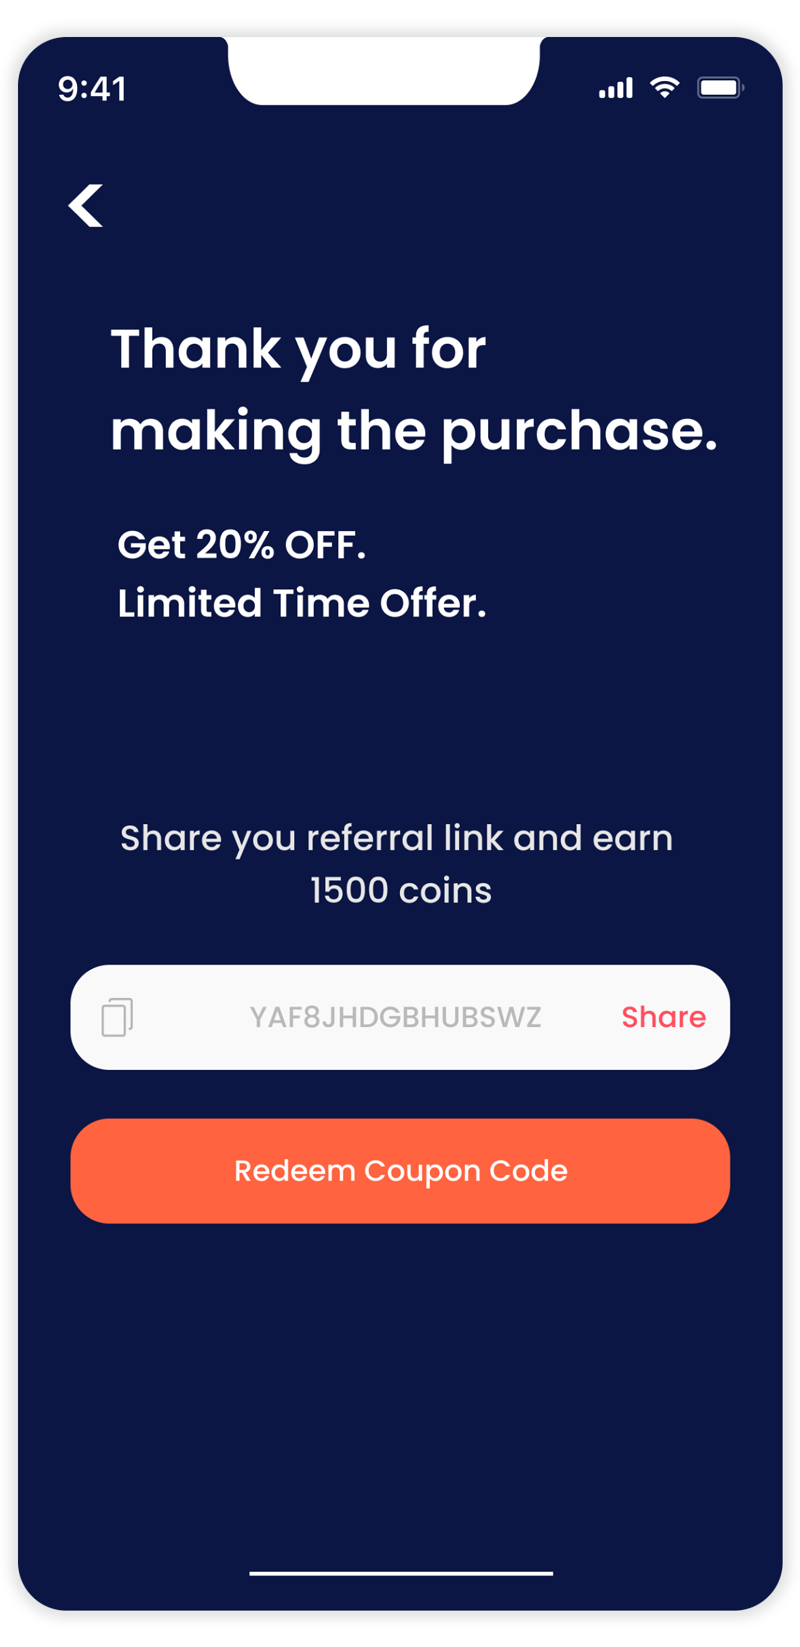 Reward coupons on every purchase